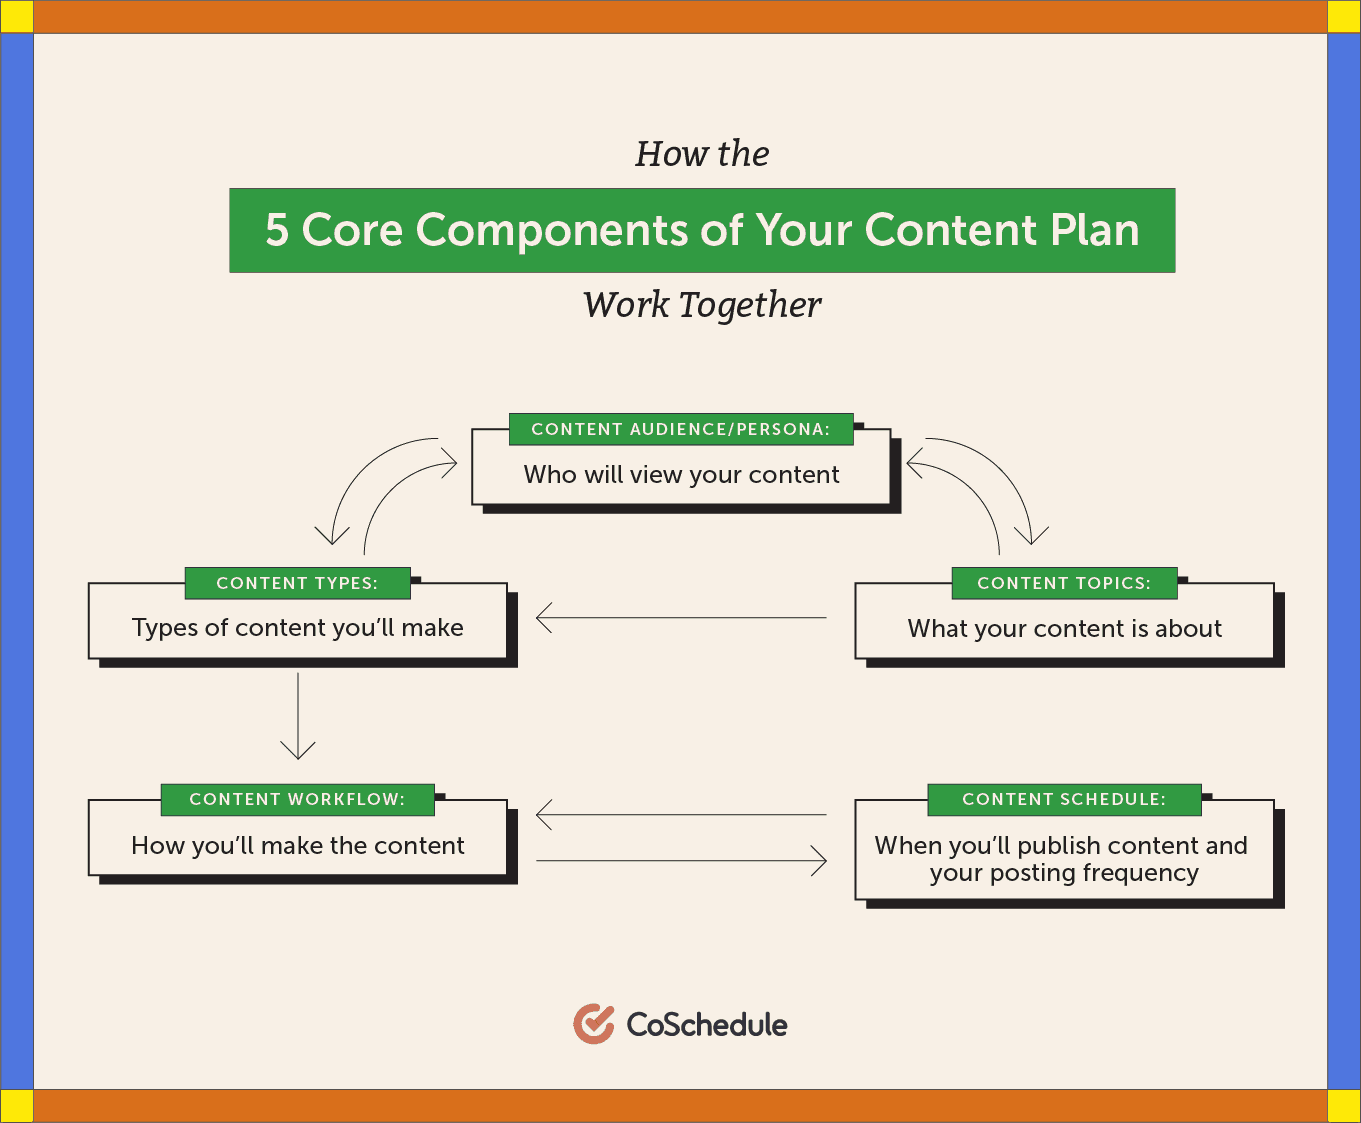 5 core components of your content plan